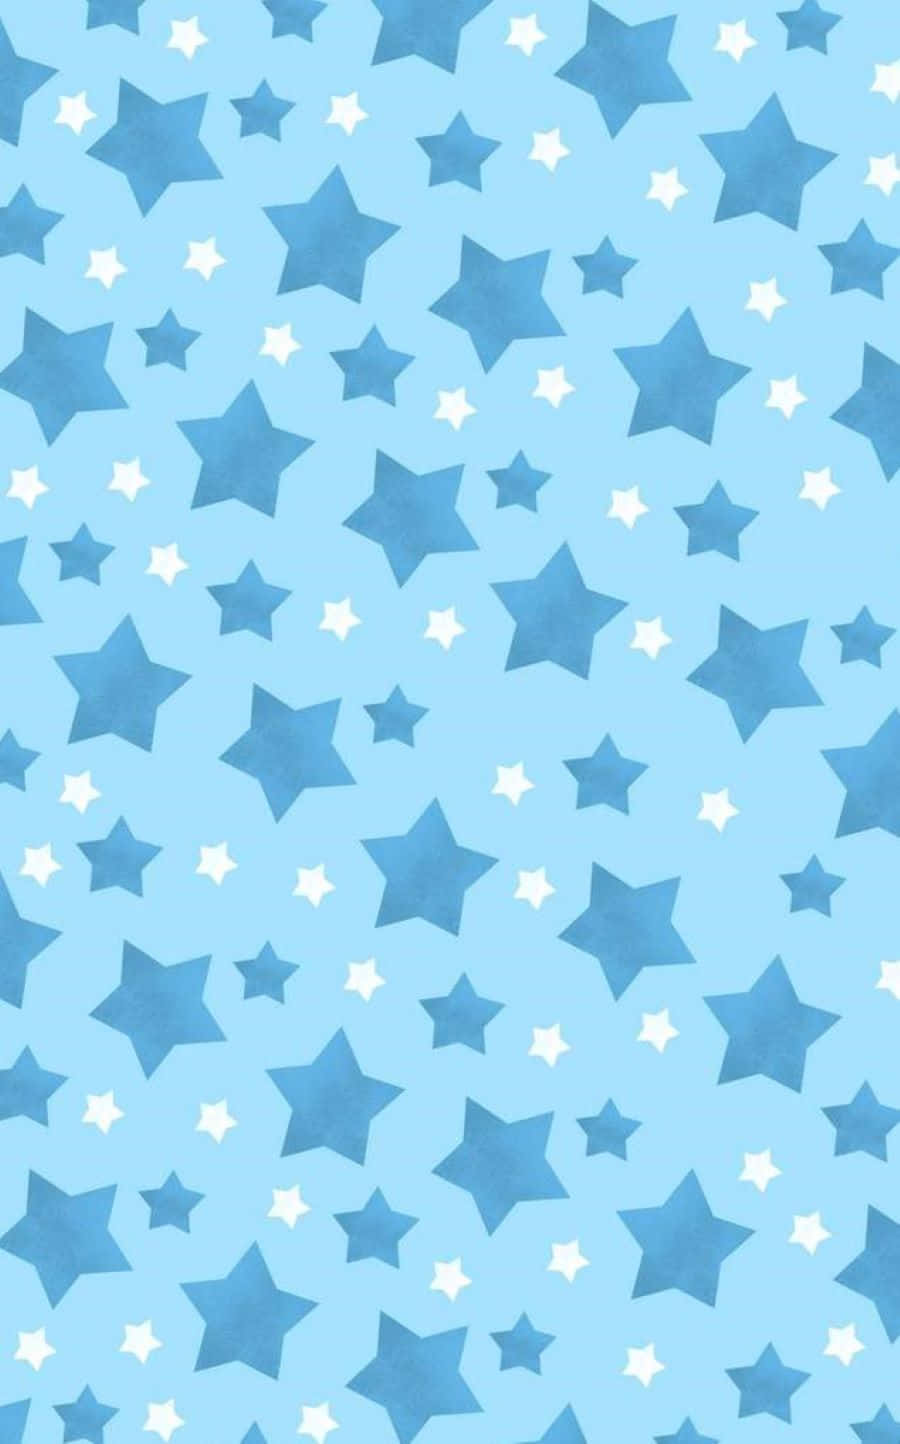 Make a wish and let your dreams light up like the Aesthetic Star Wallpaper